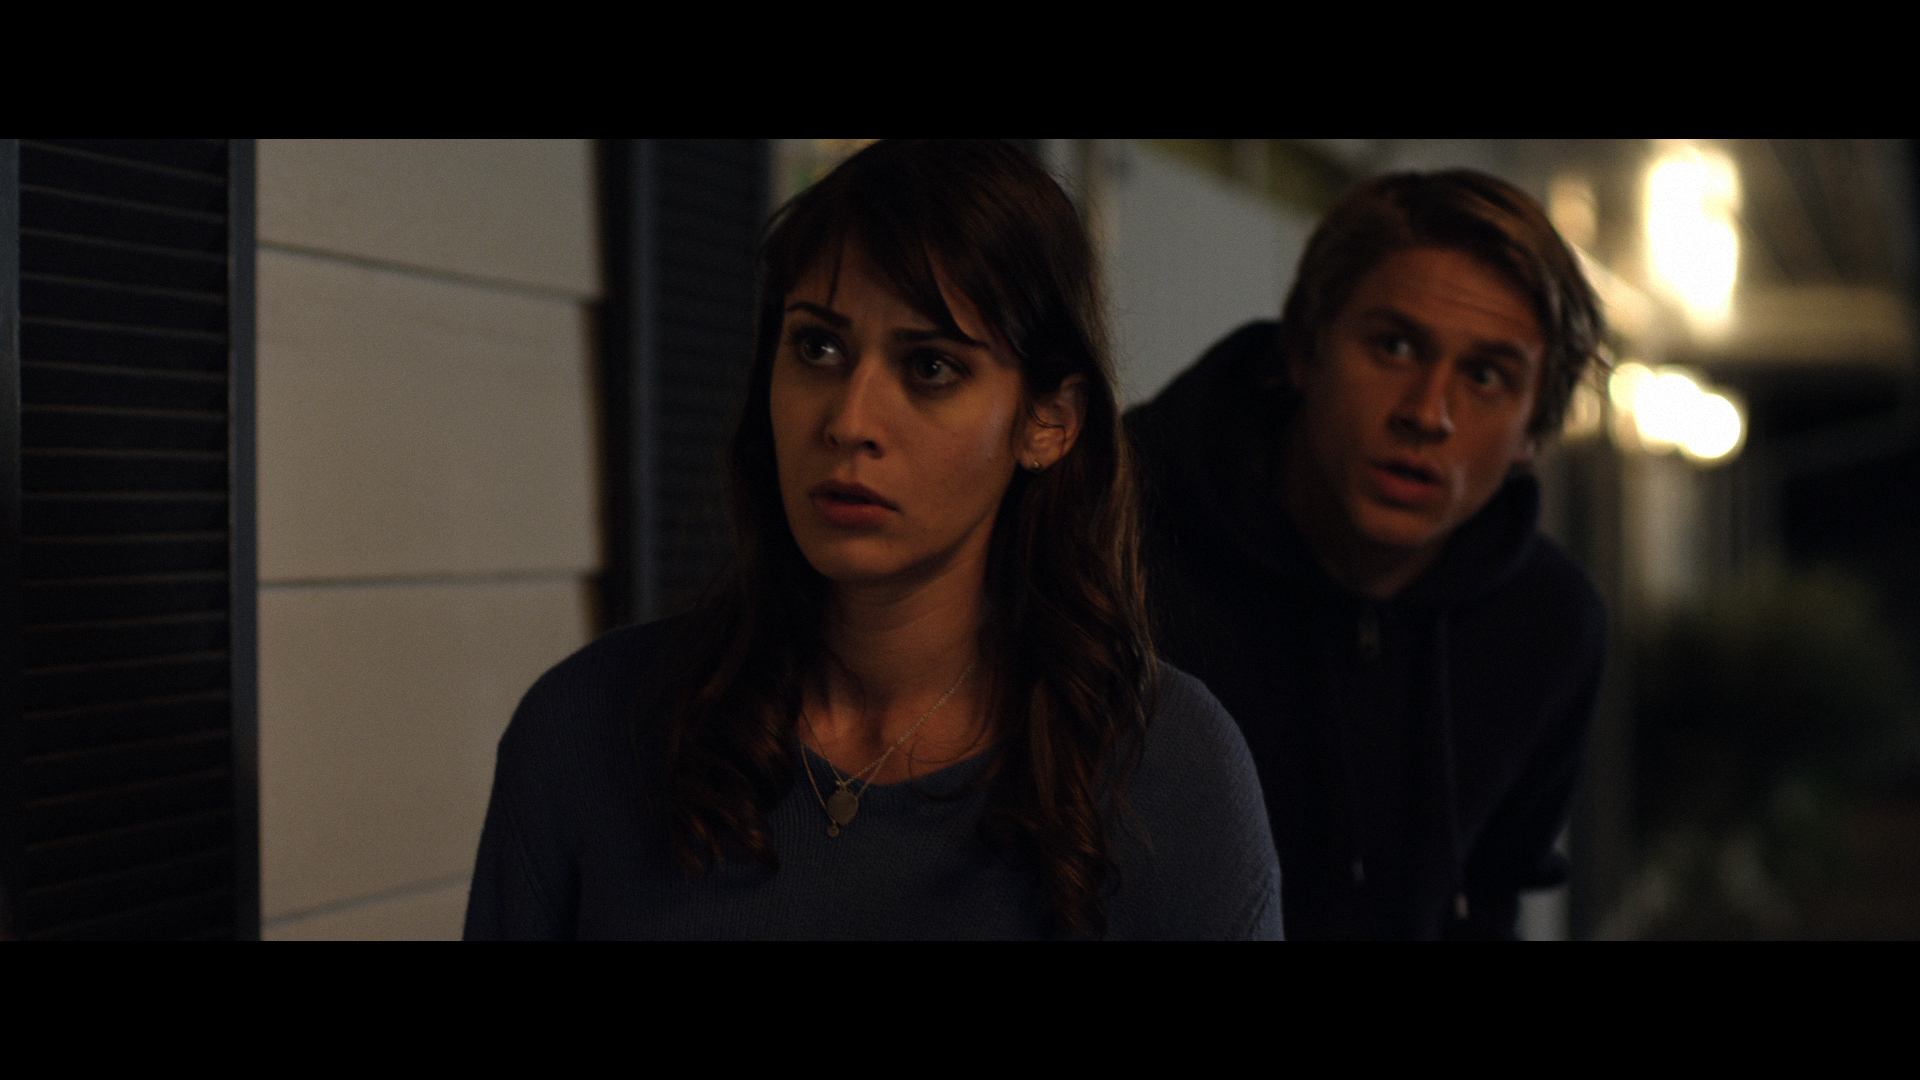 Still of Lizzy Caplan and Charlie Hunnam in Frankie Go Boom (2012)